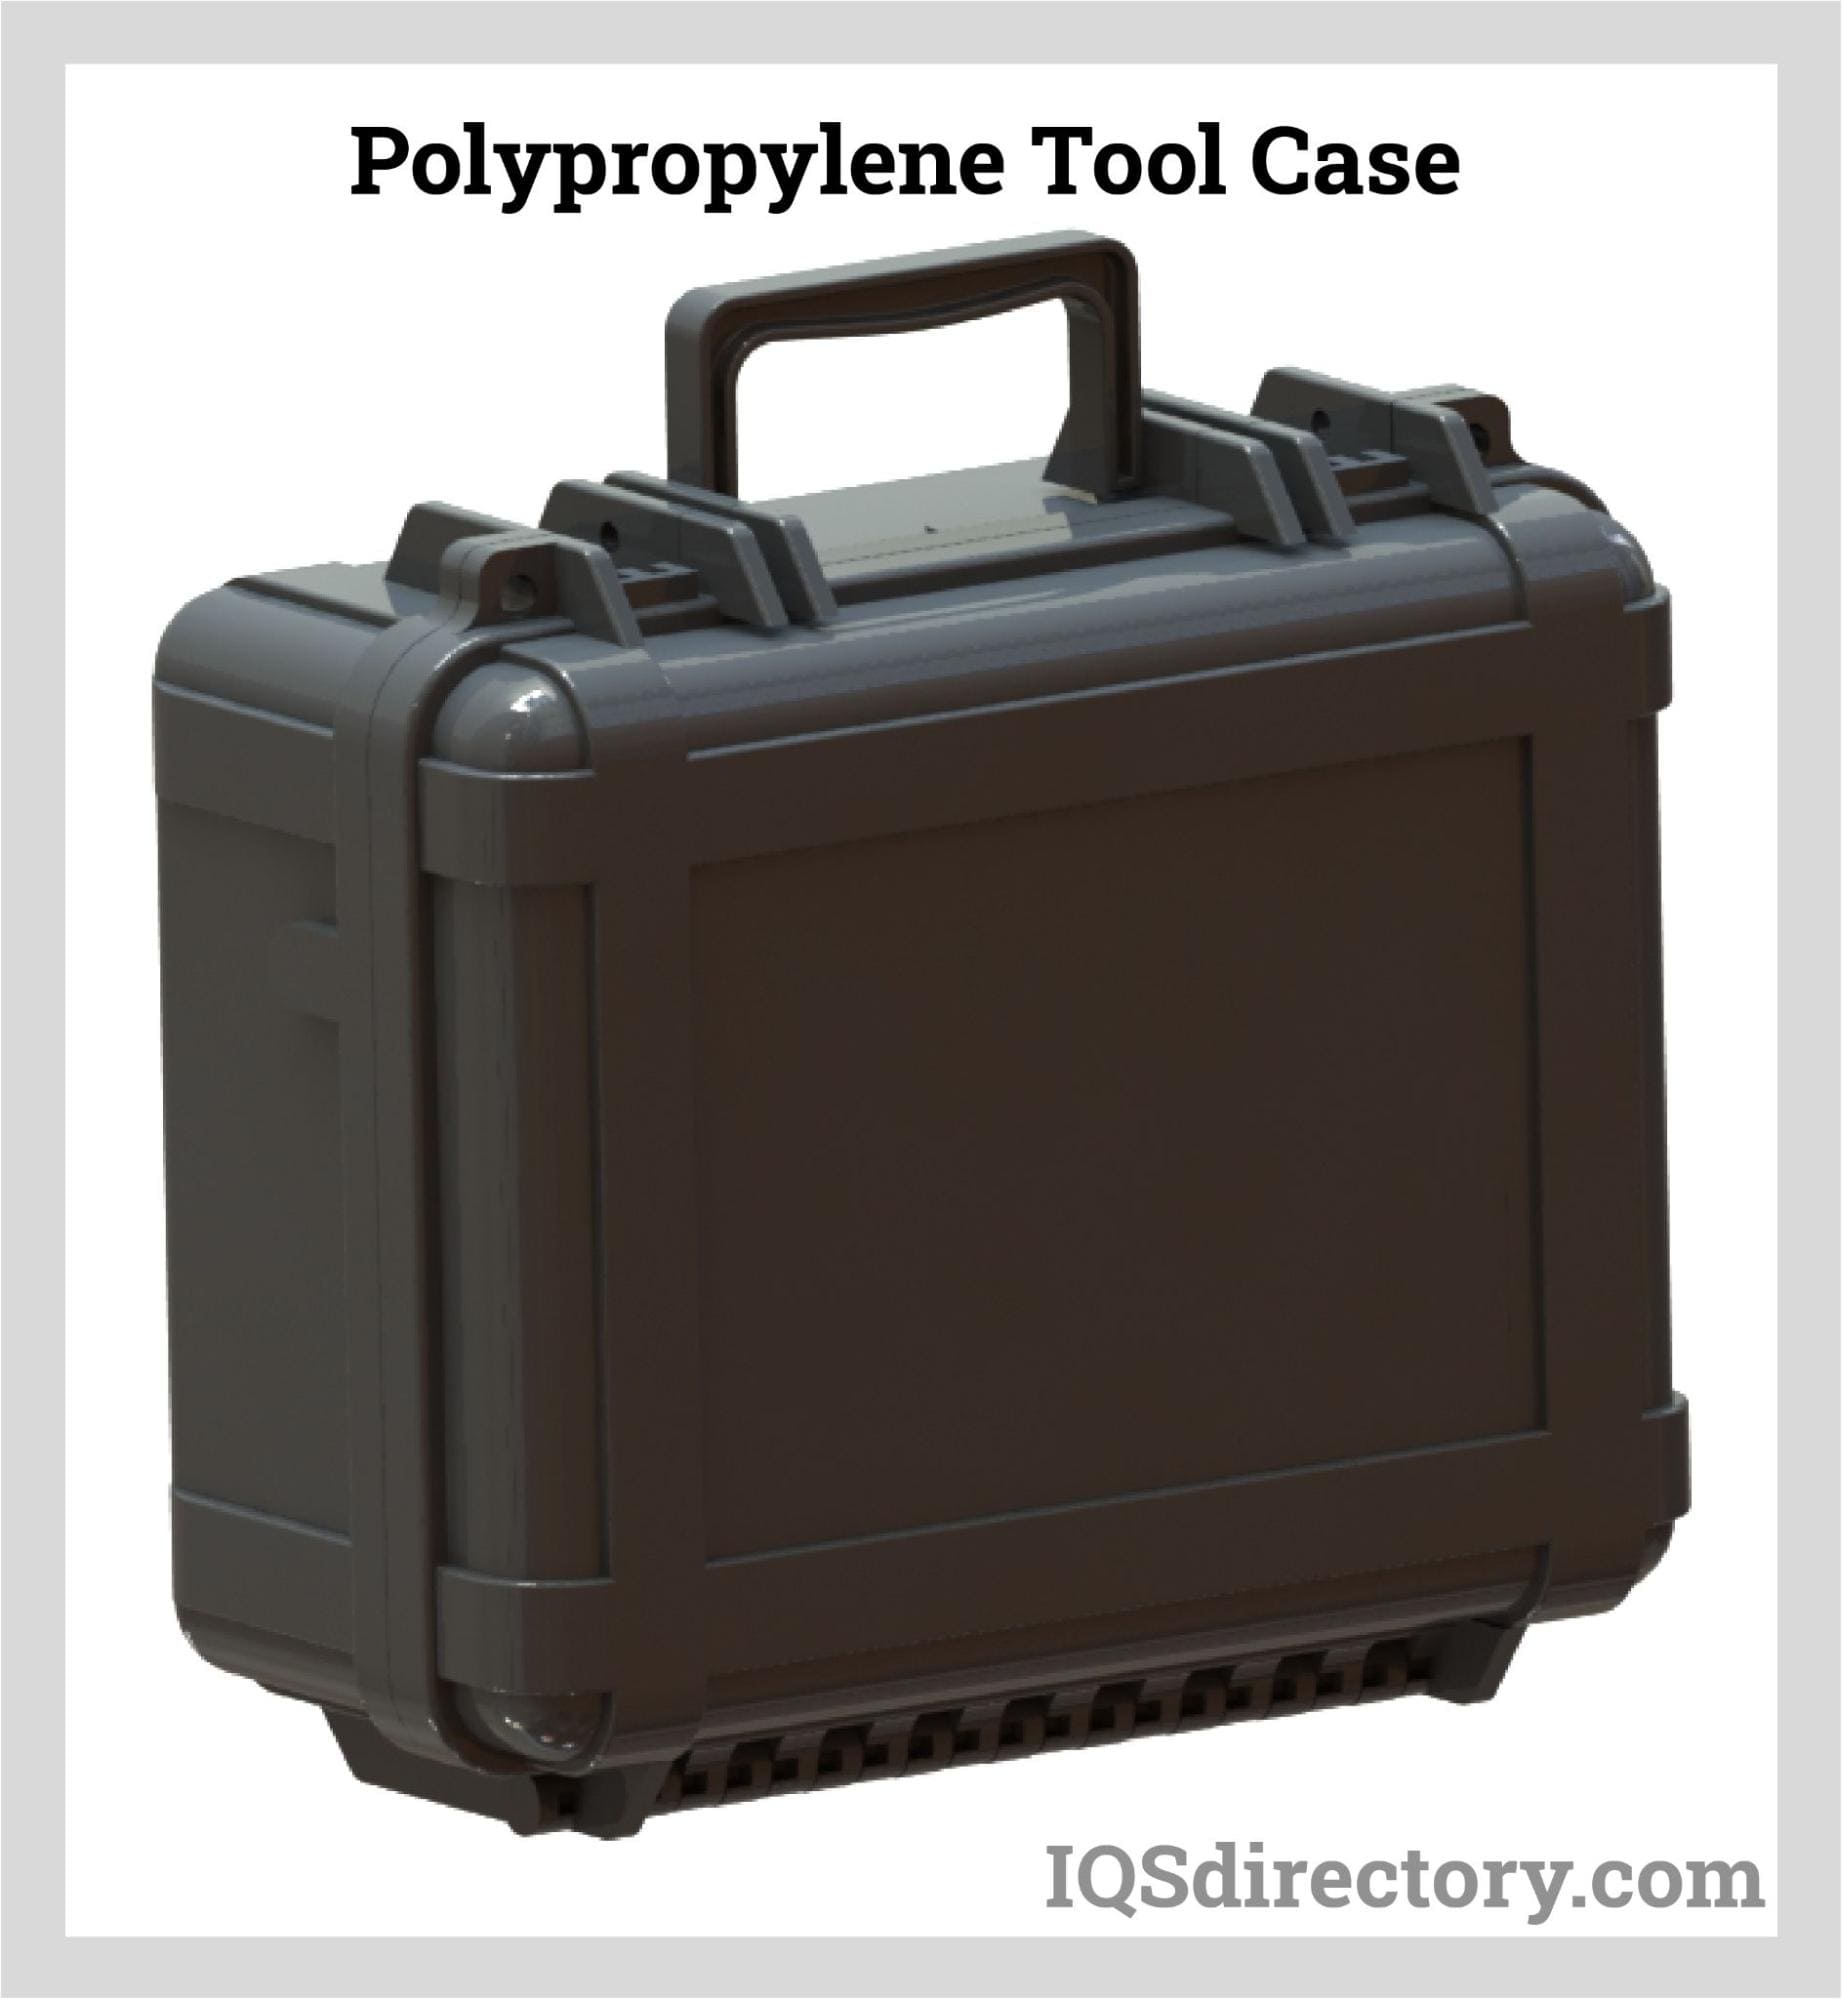 Tool Case: Types, Uses, Features and Benefits